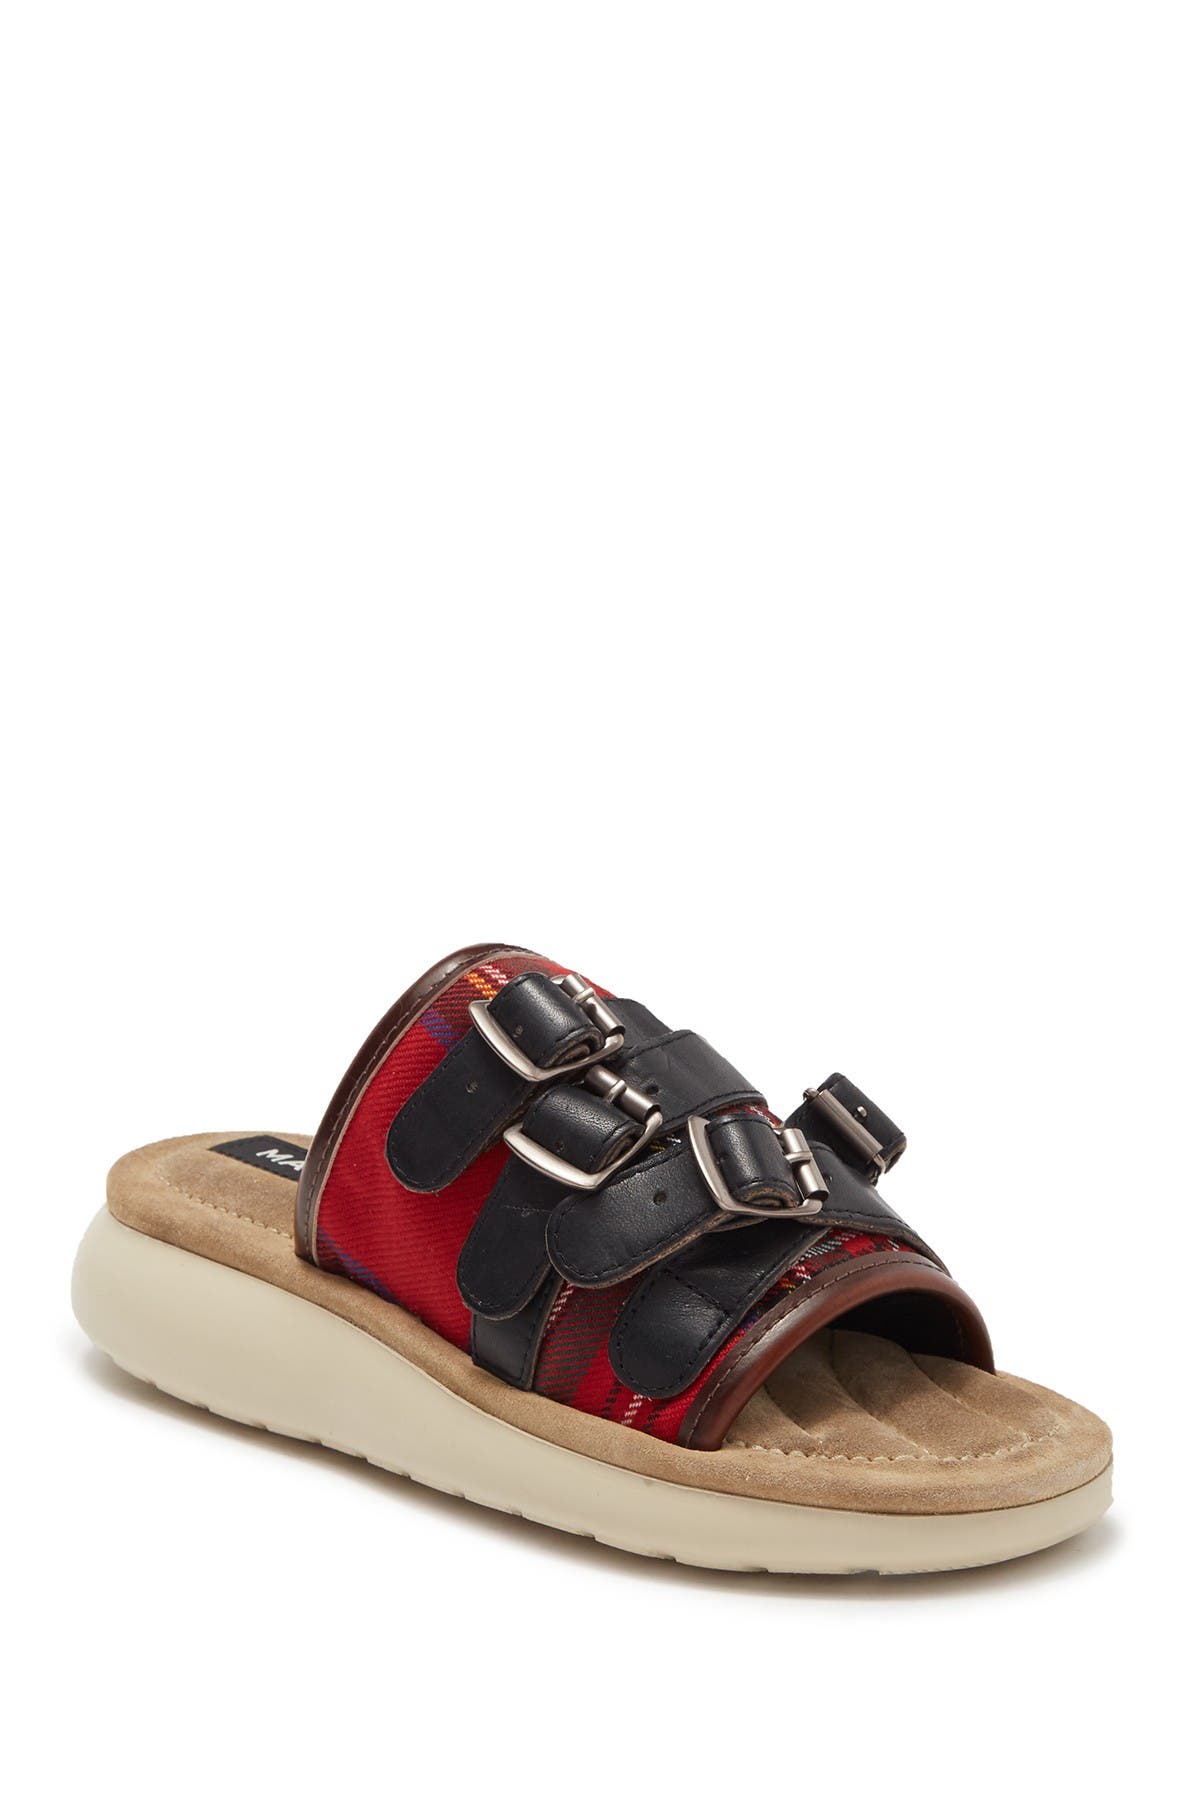 Marc Jacobs Emerson Multi Strap Plaid Sport Sandal In Red Multi